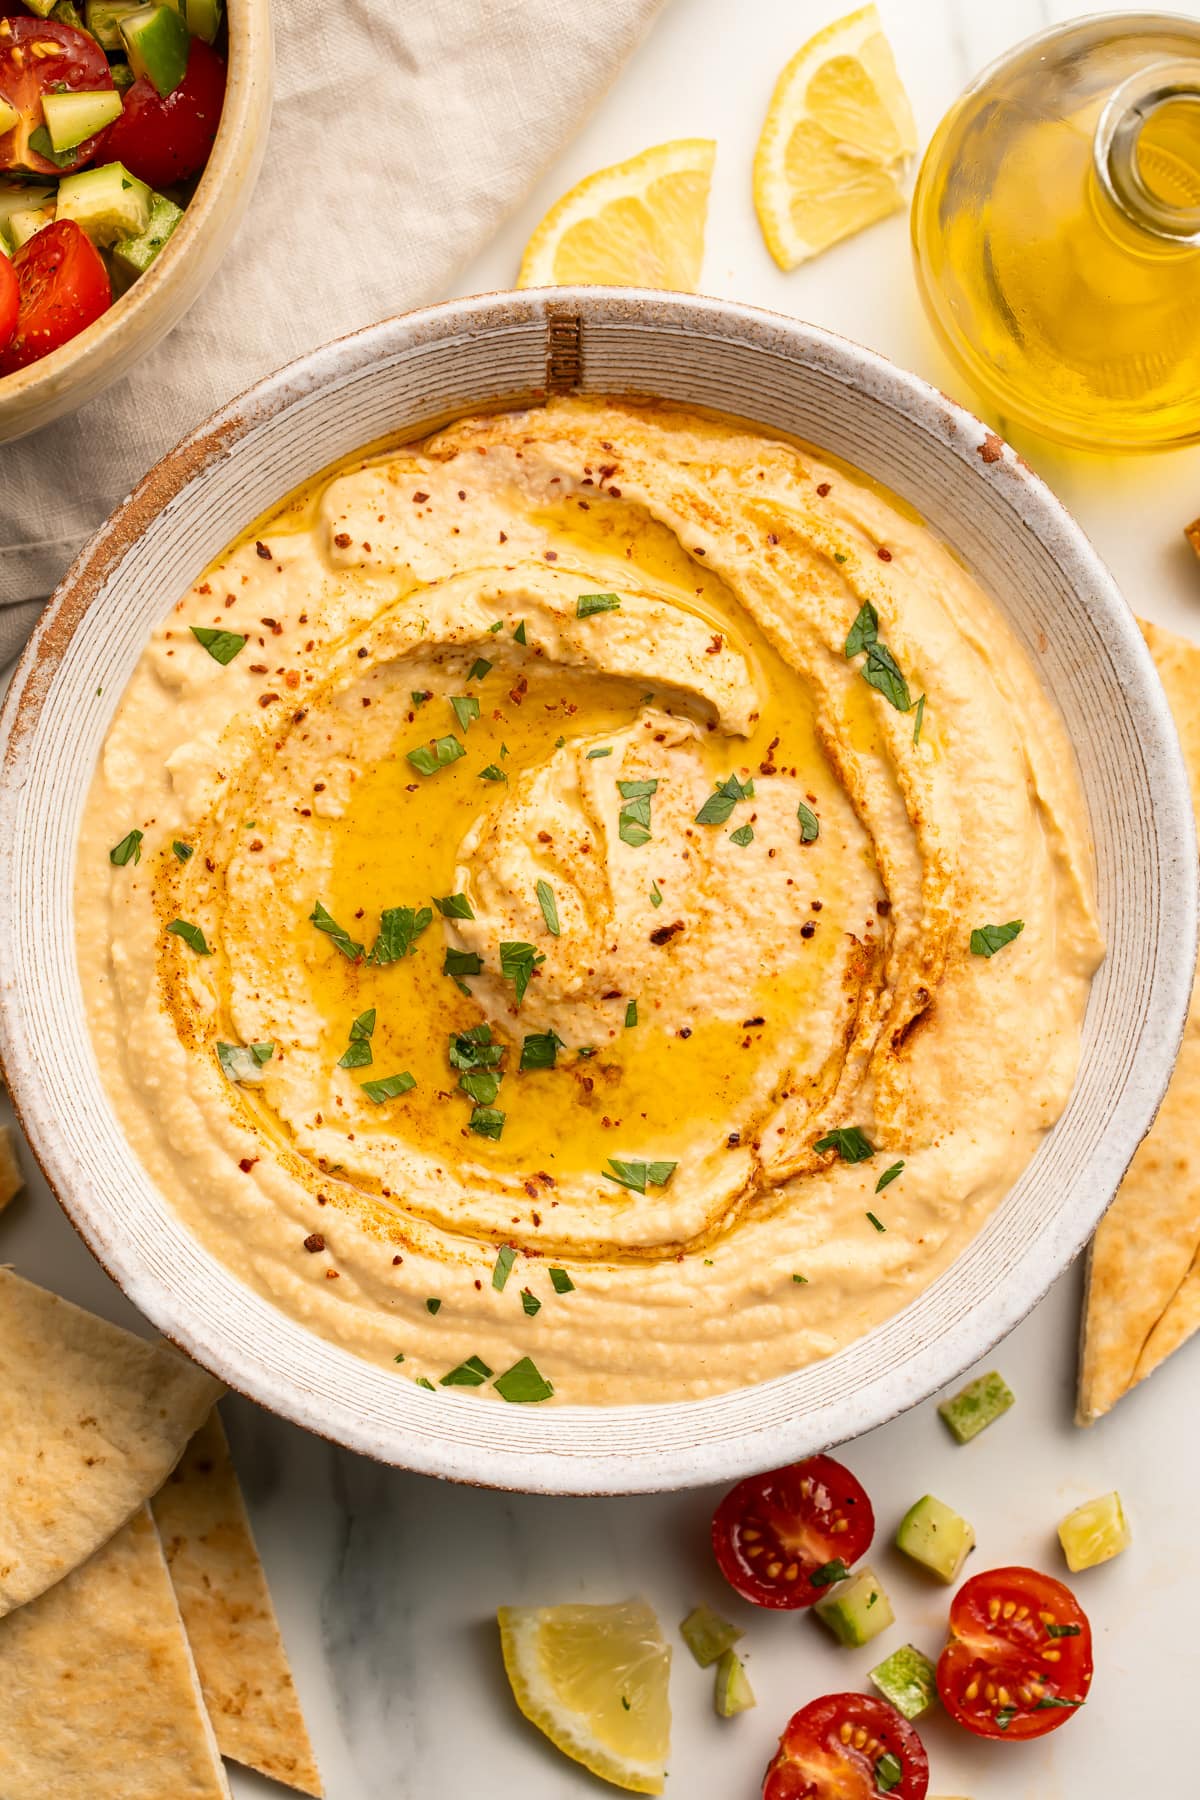 Overhead view of a white bowl holding hummus made without tahini, swirled with olive oil and garnished with herbs.